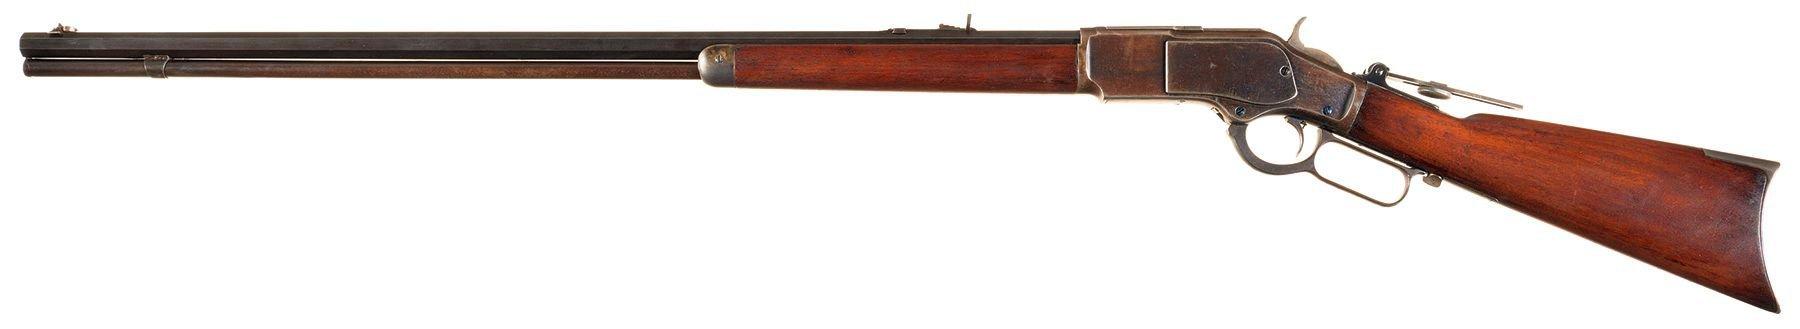 Winchester Model 1873 Rifle with Special Features